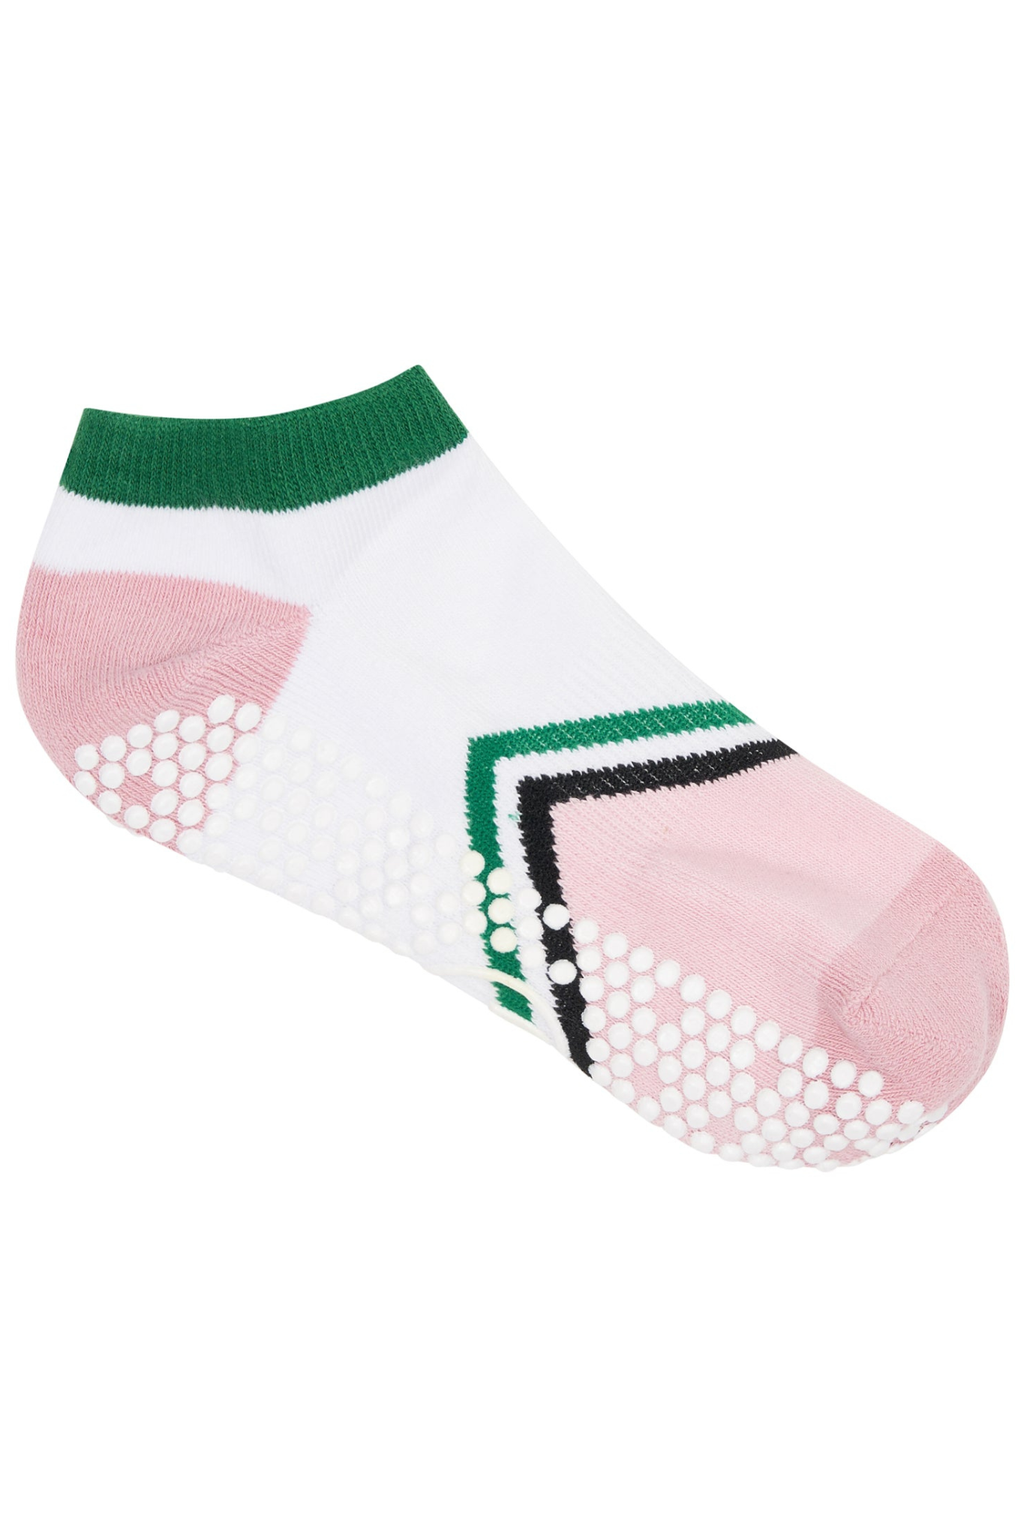 Classic Low Rise Grip Socks - Preppy Volley